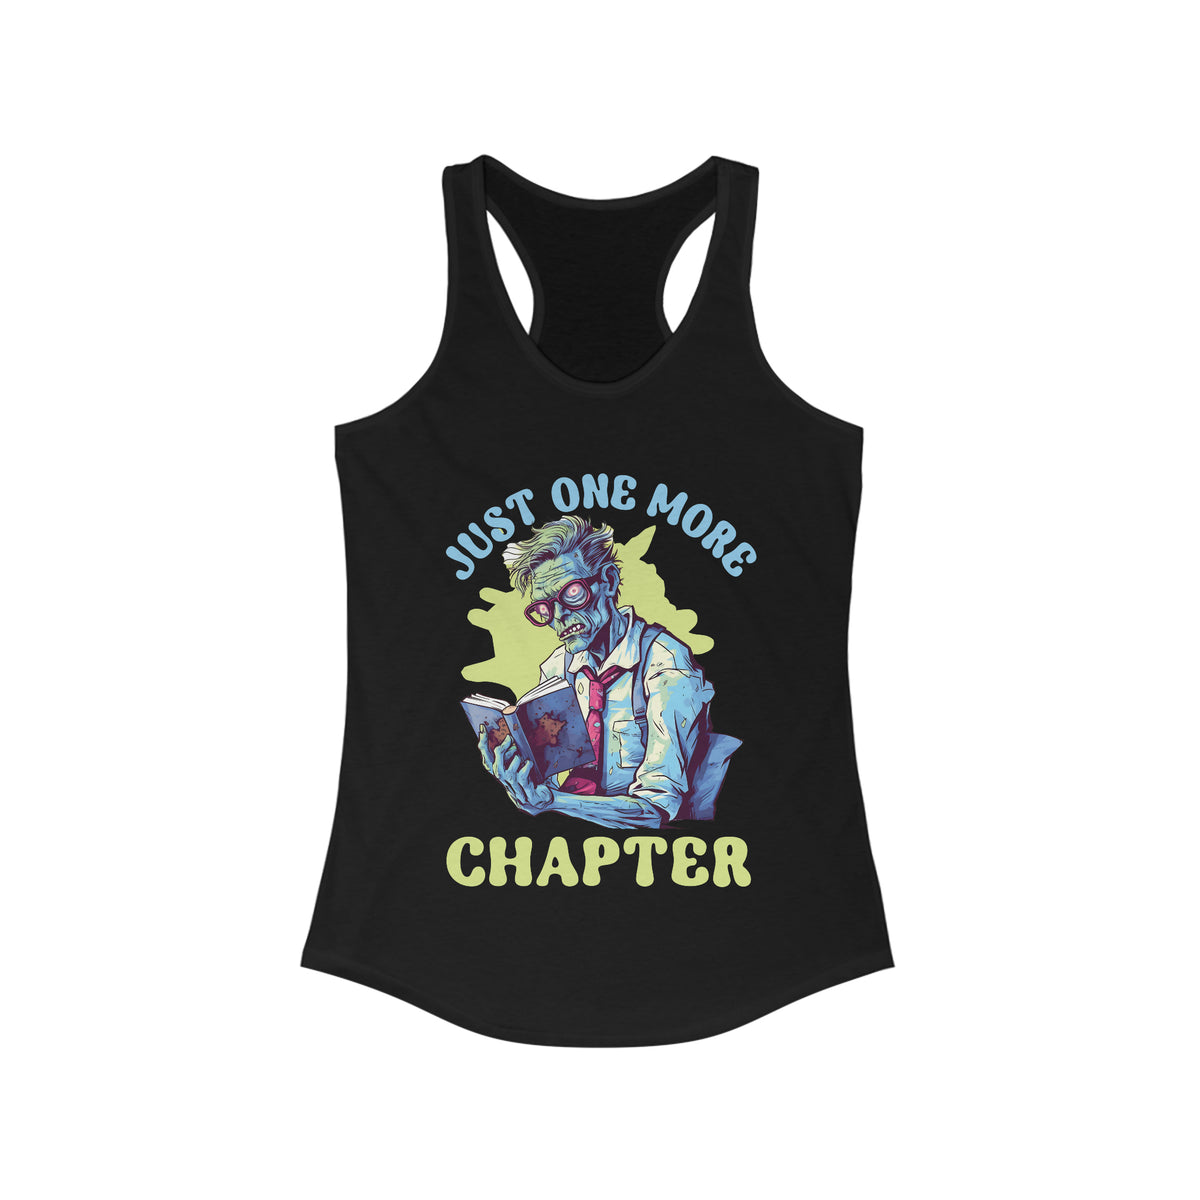 Just One More Chapter Zombie Shirt | Halloween Book Shirt | Book Lover shirt | Book Lover Gift | Women's Slim-fit Racerback Tank Top